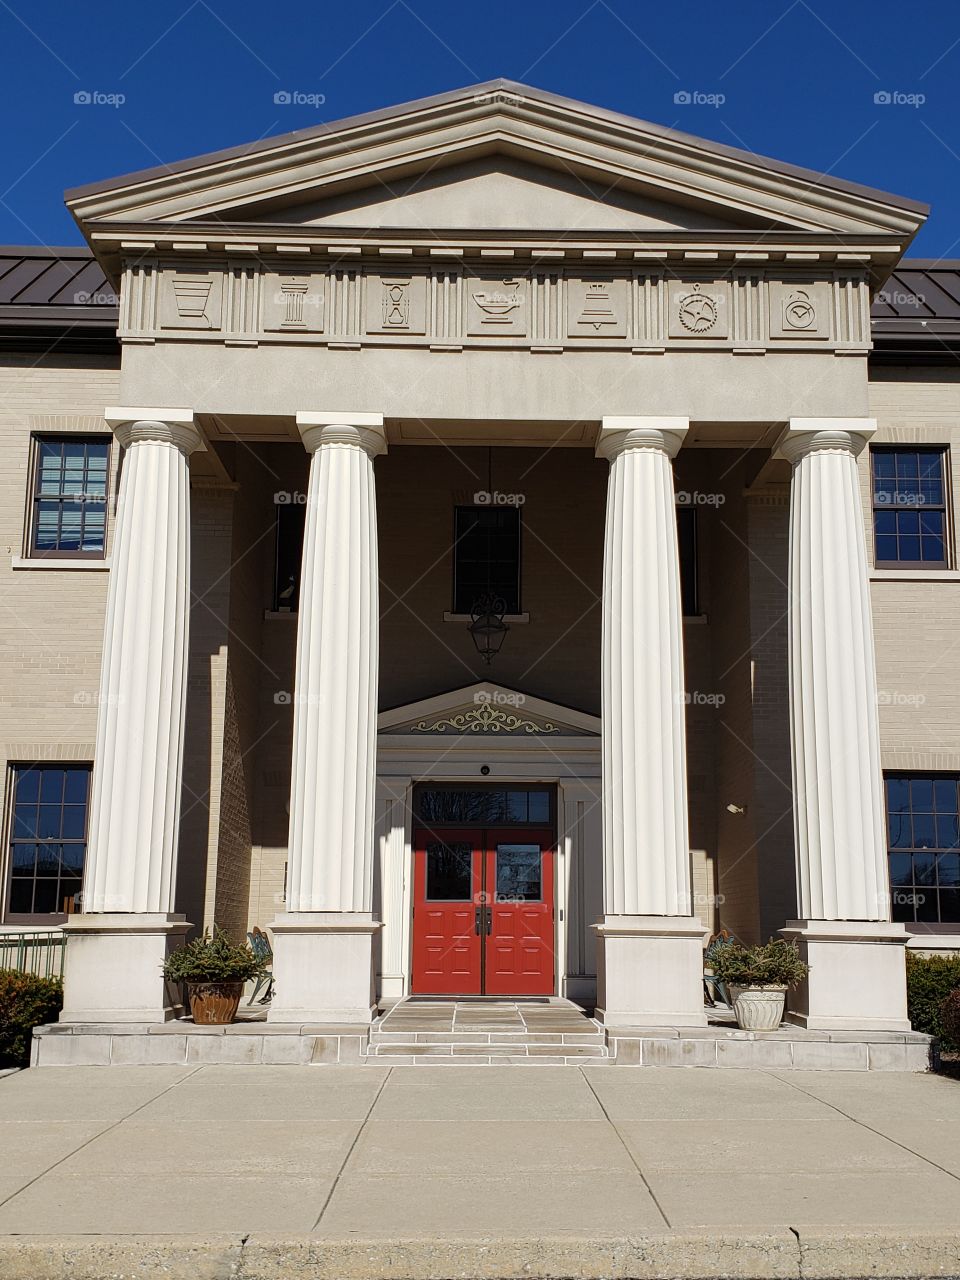 Grand entrance with columns and red double door